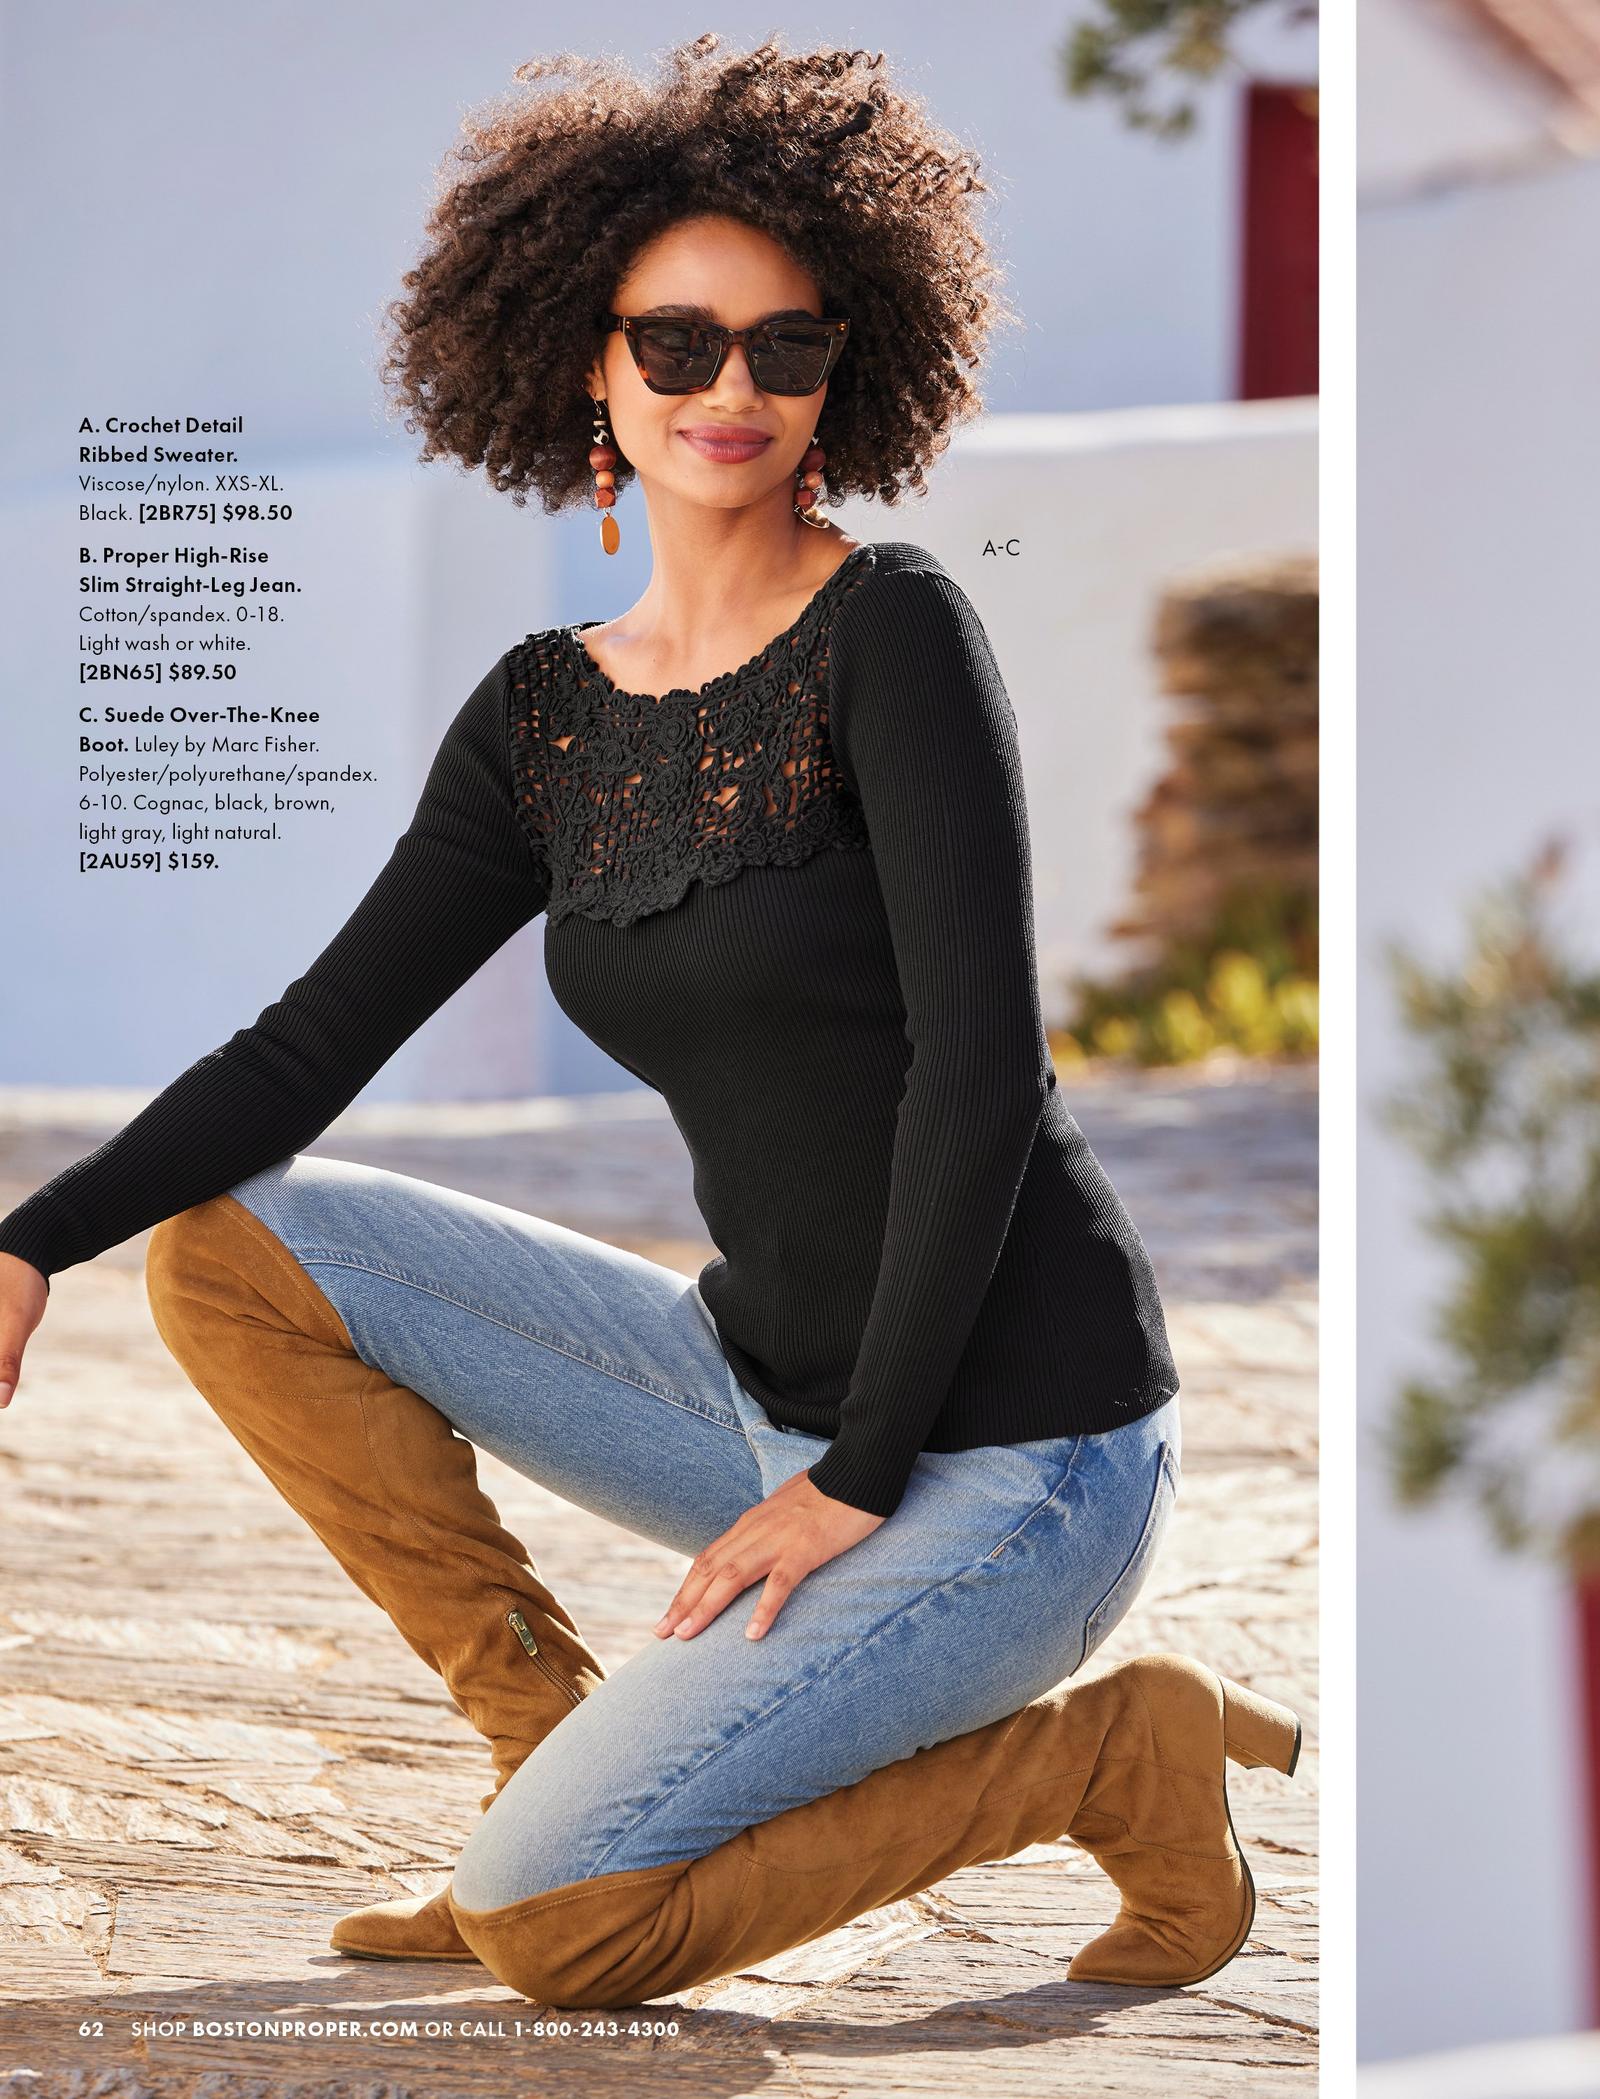 model wearing a black crochet ribbed sweater, jeans, sunglasses, and brown suede over-the-knee boots.